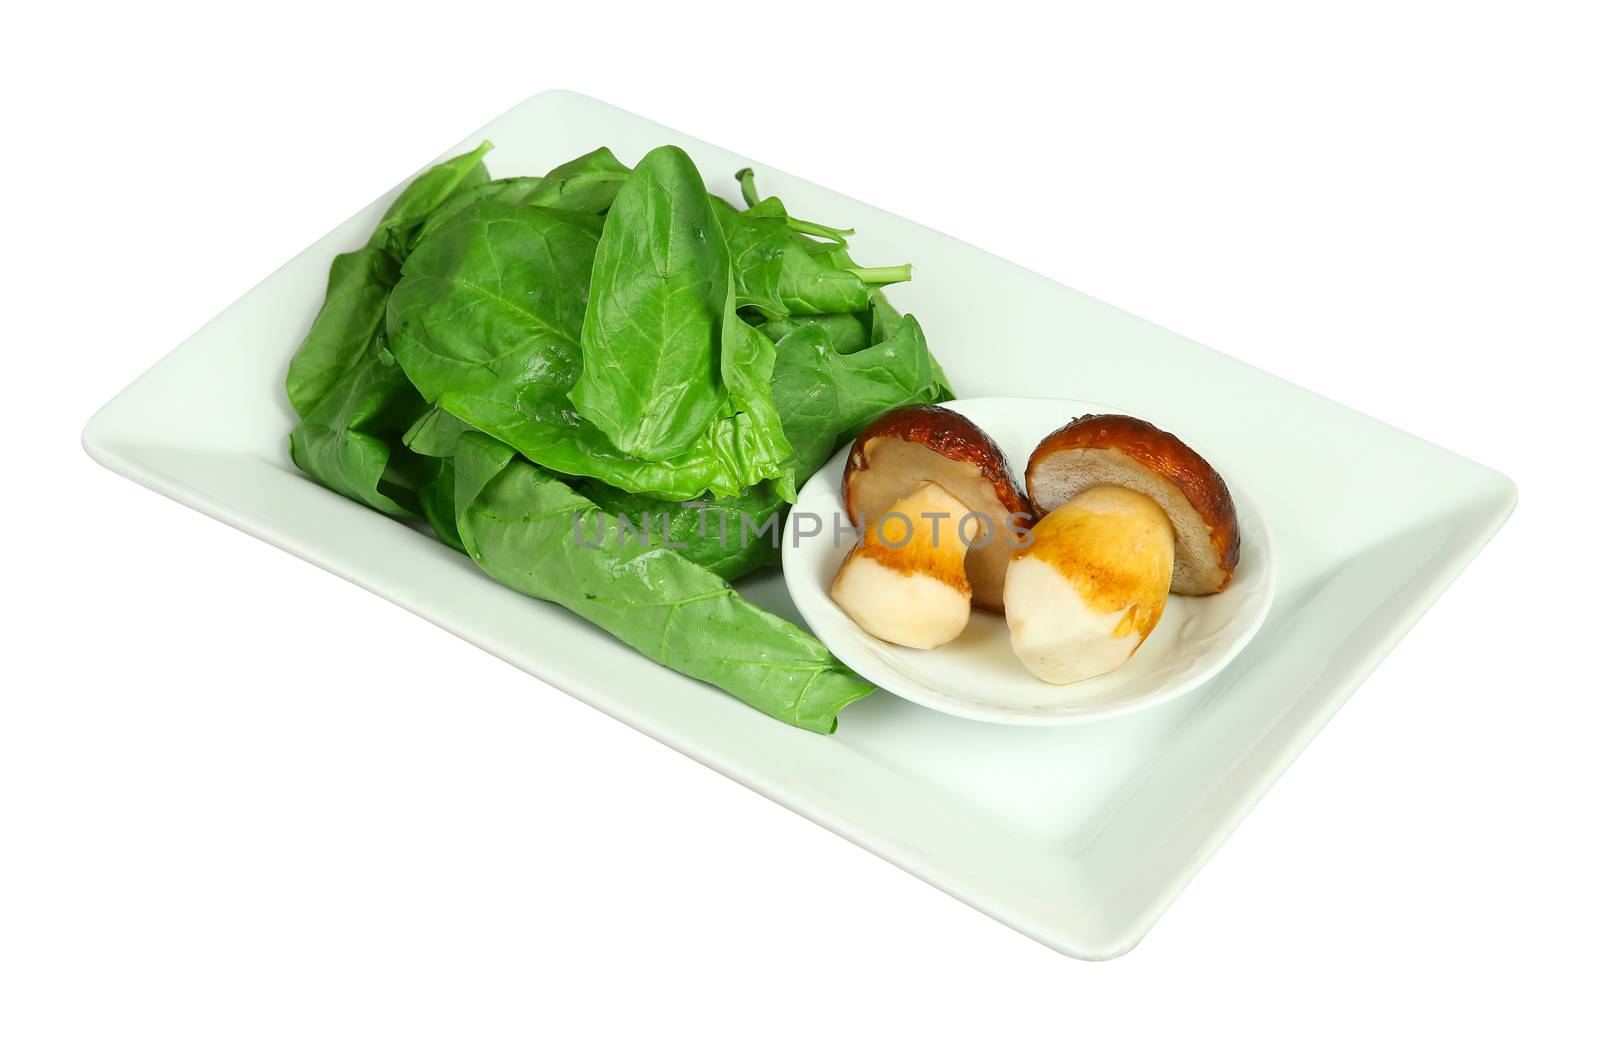 Fresh boletus mushrooms and spinach on white plate. Isolated on white.